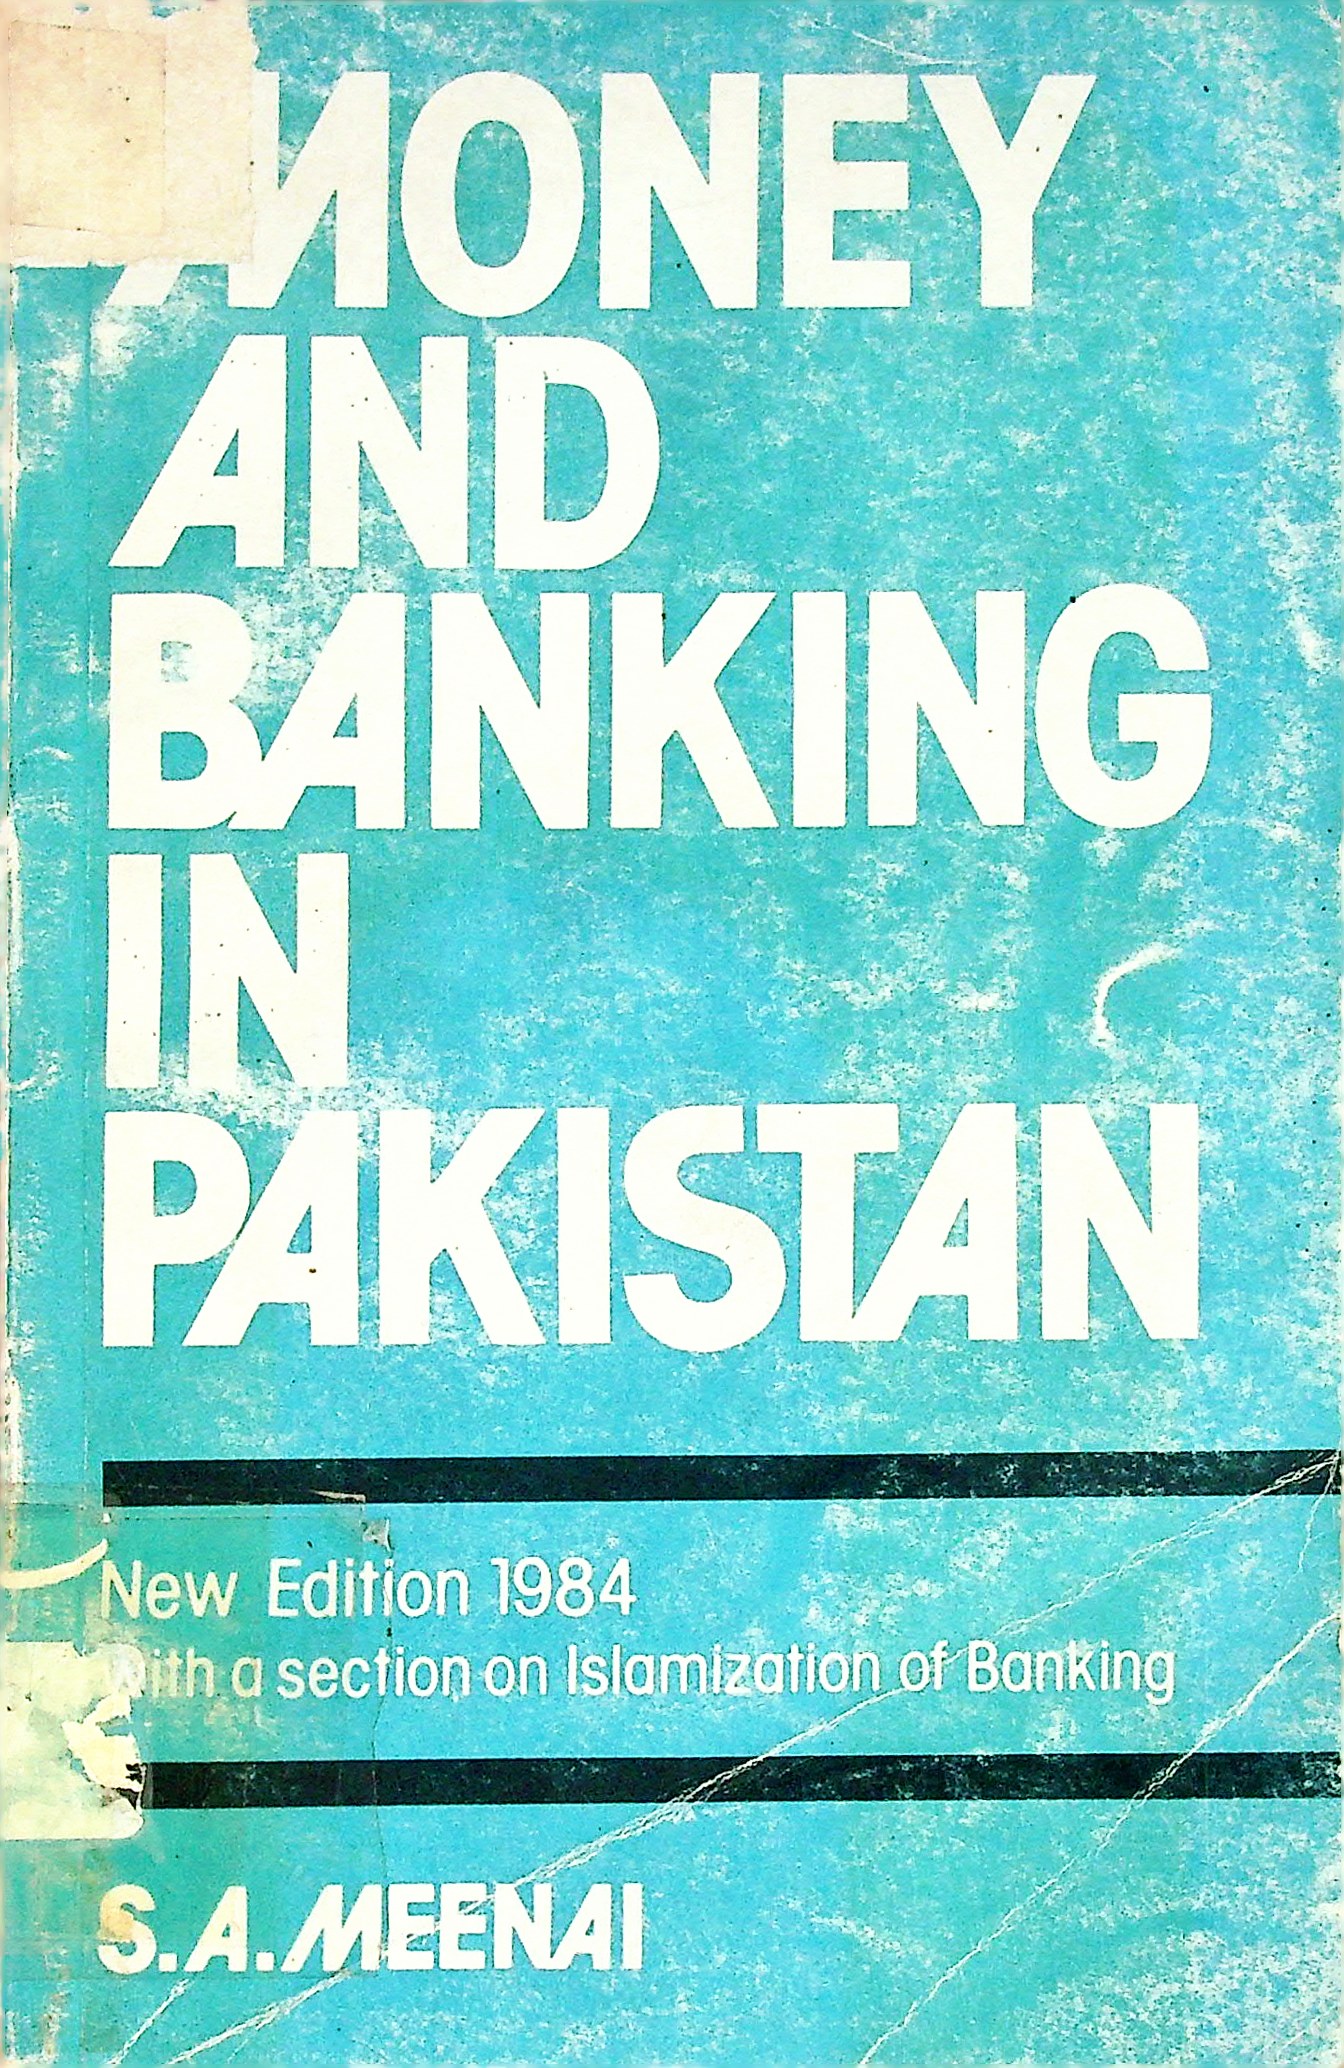 Money and banking in Pakistan 